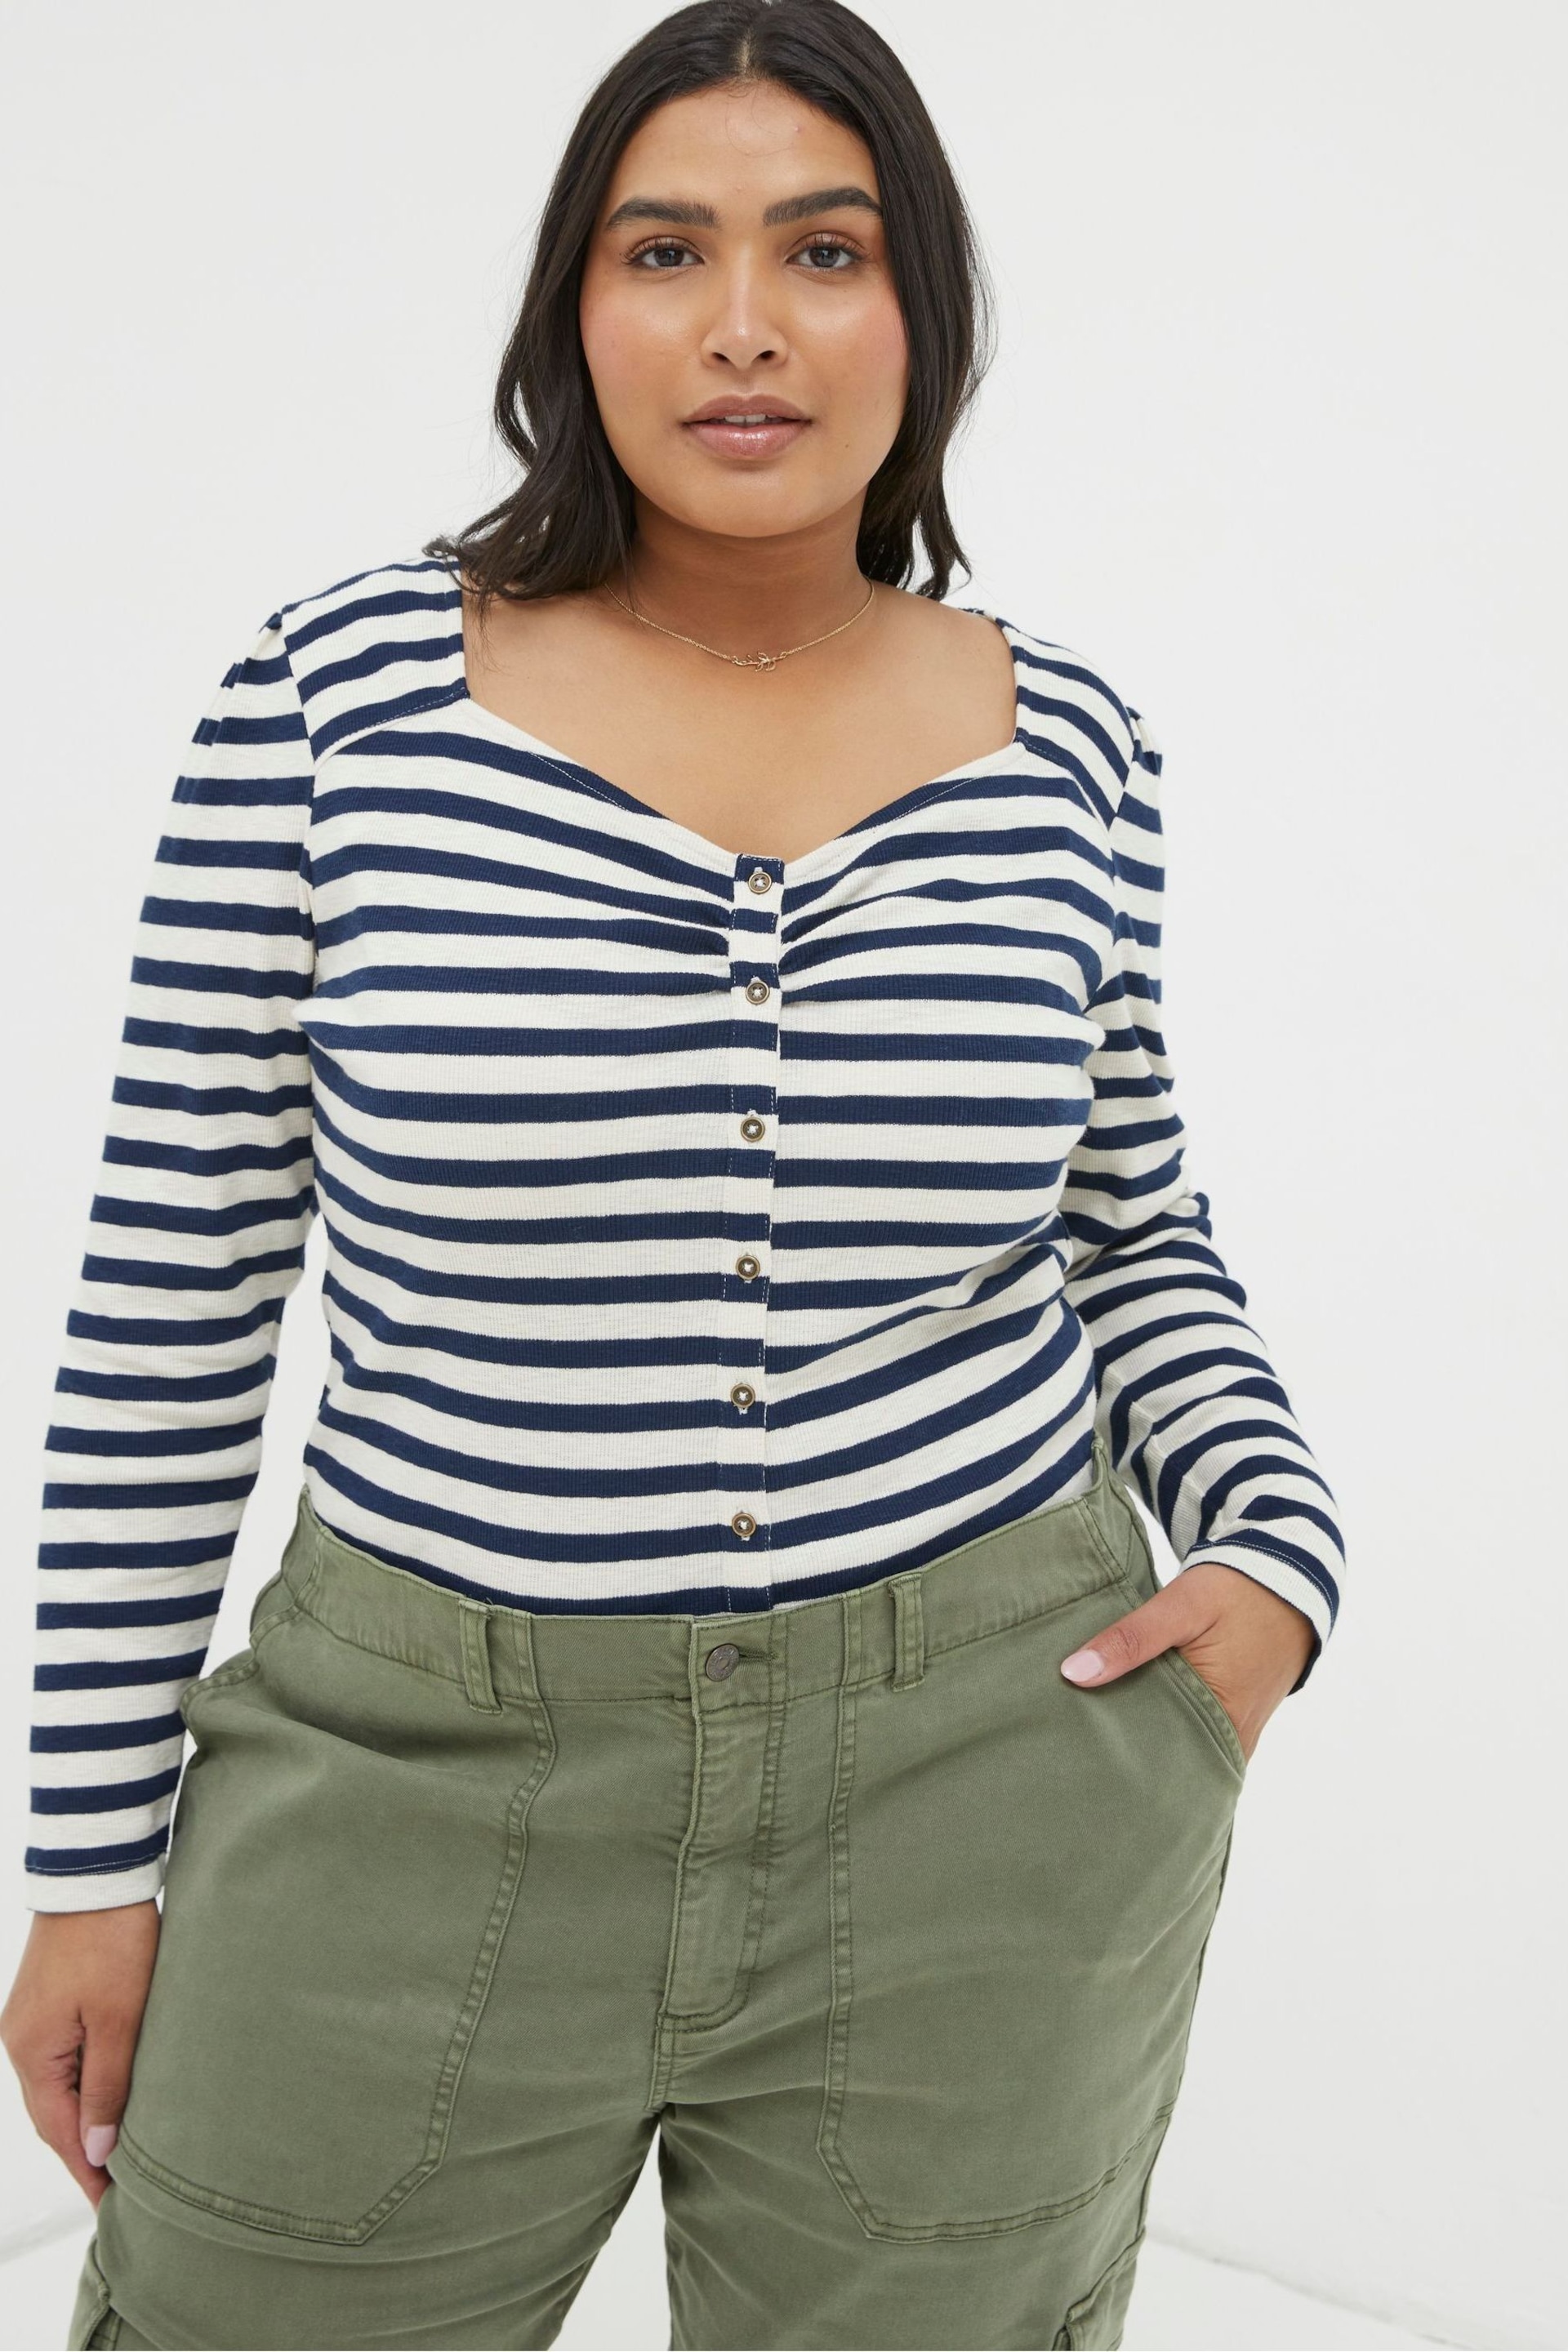 FatFace Blue Carly Stripe Top - Image 3 of 5